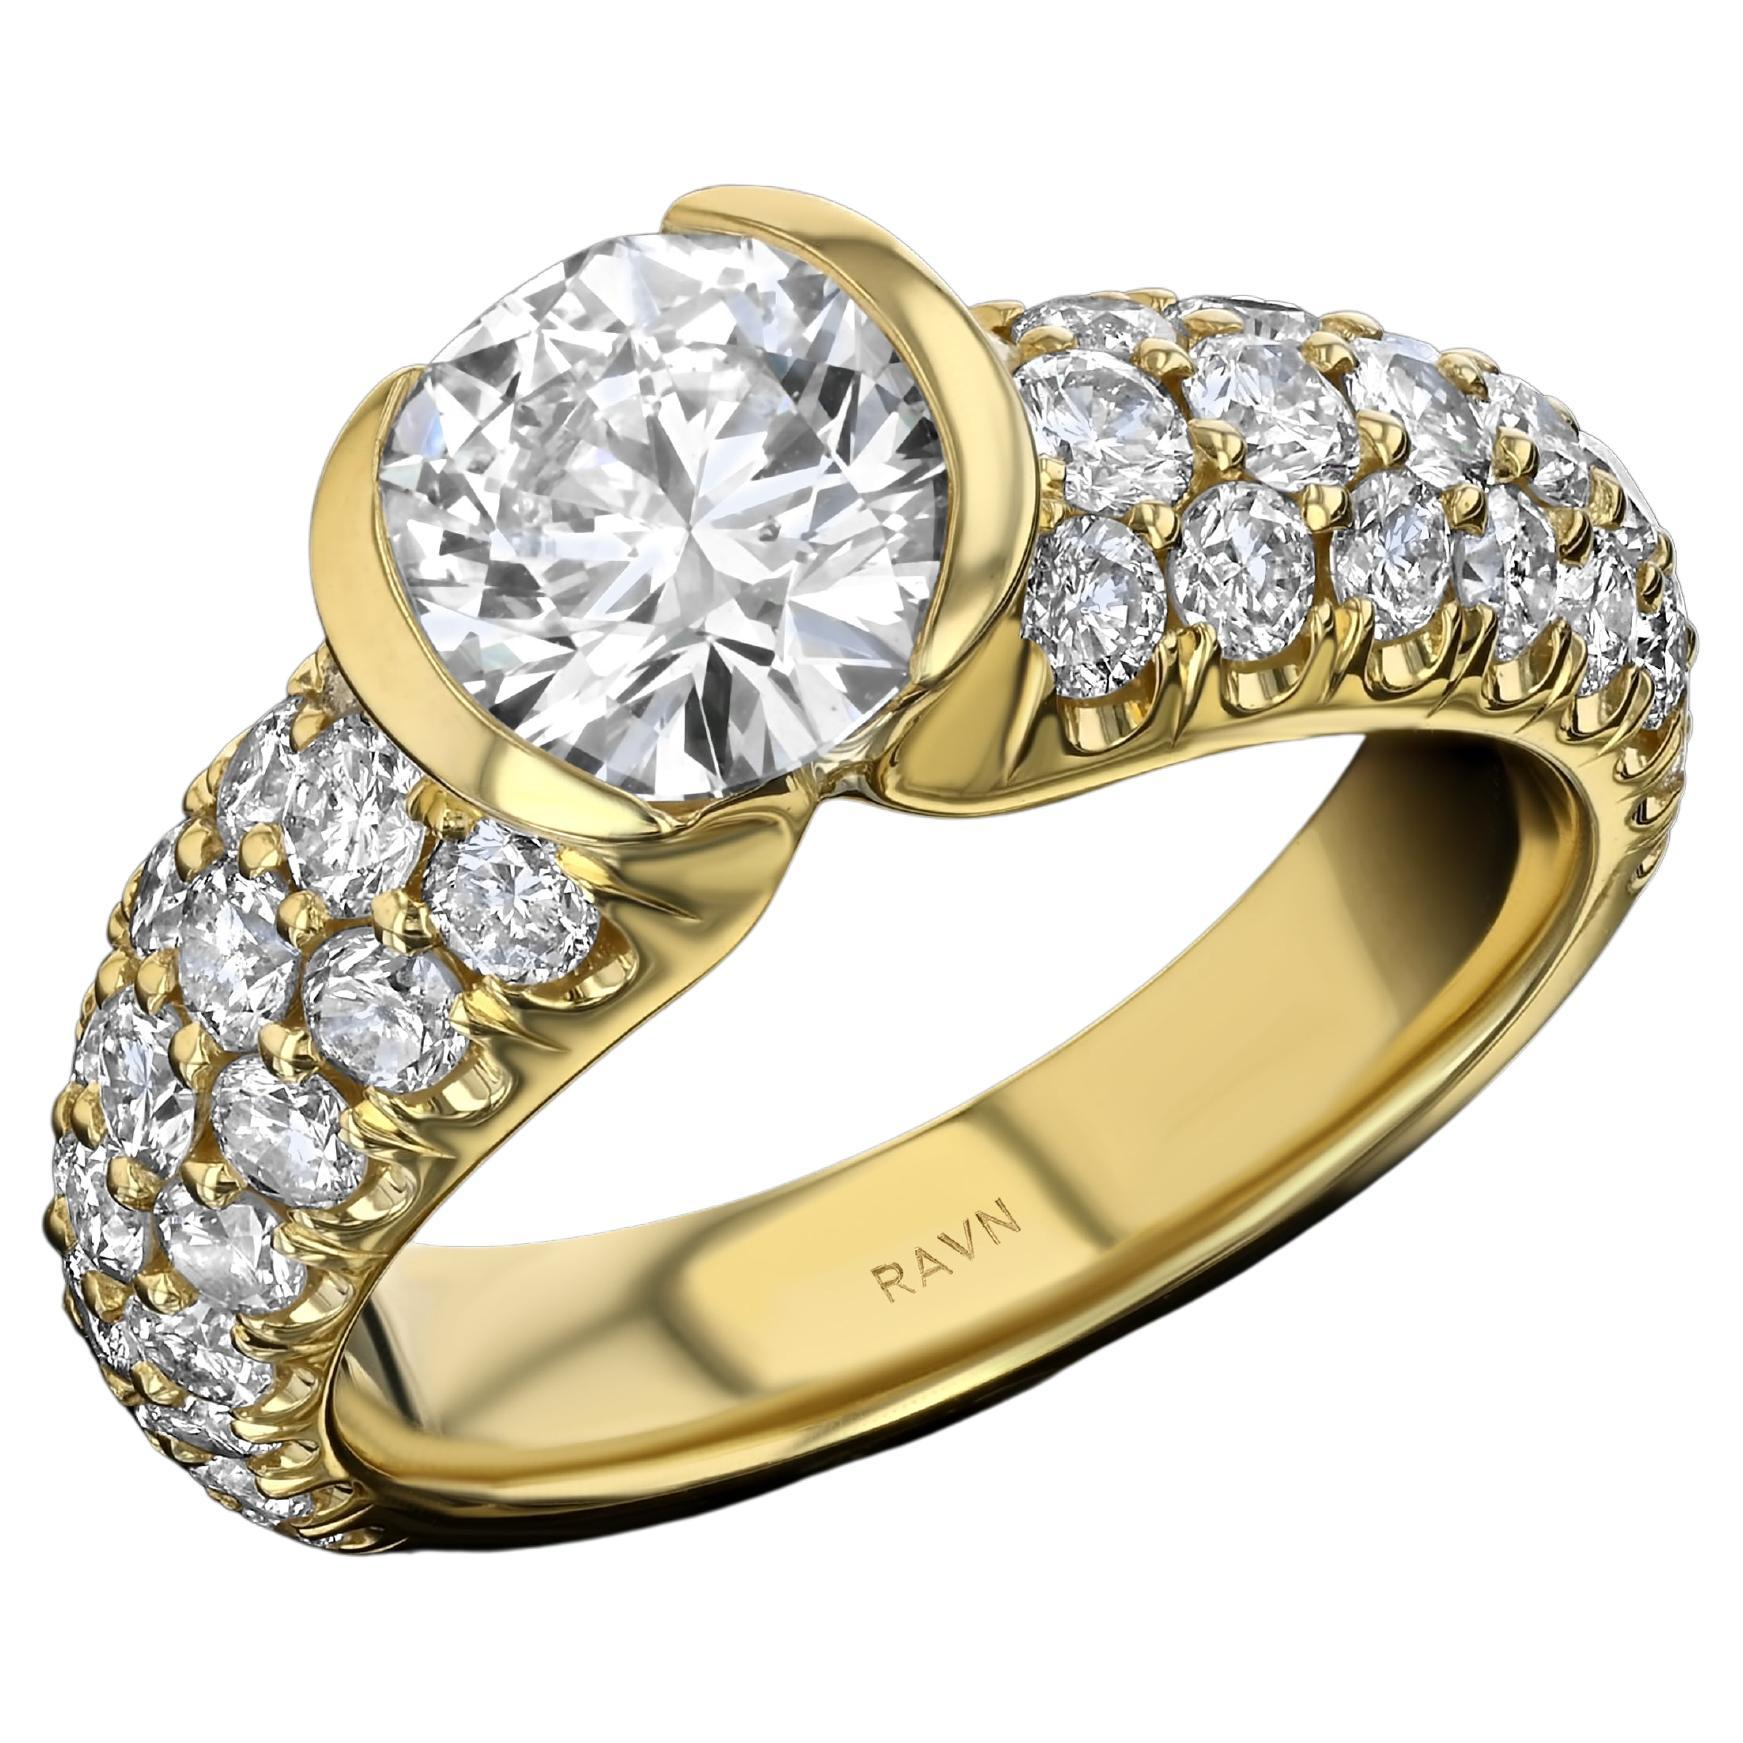 For Sale:  House of RAVN, Signature Old World Inspired Engagement Ring, 1.69ct GIA Diamond